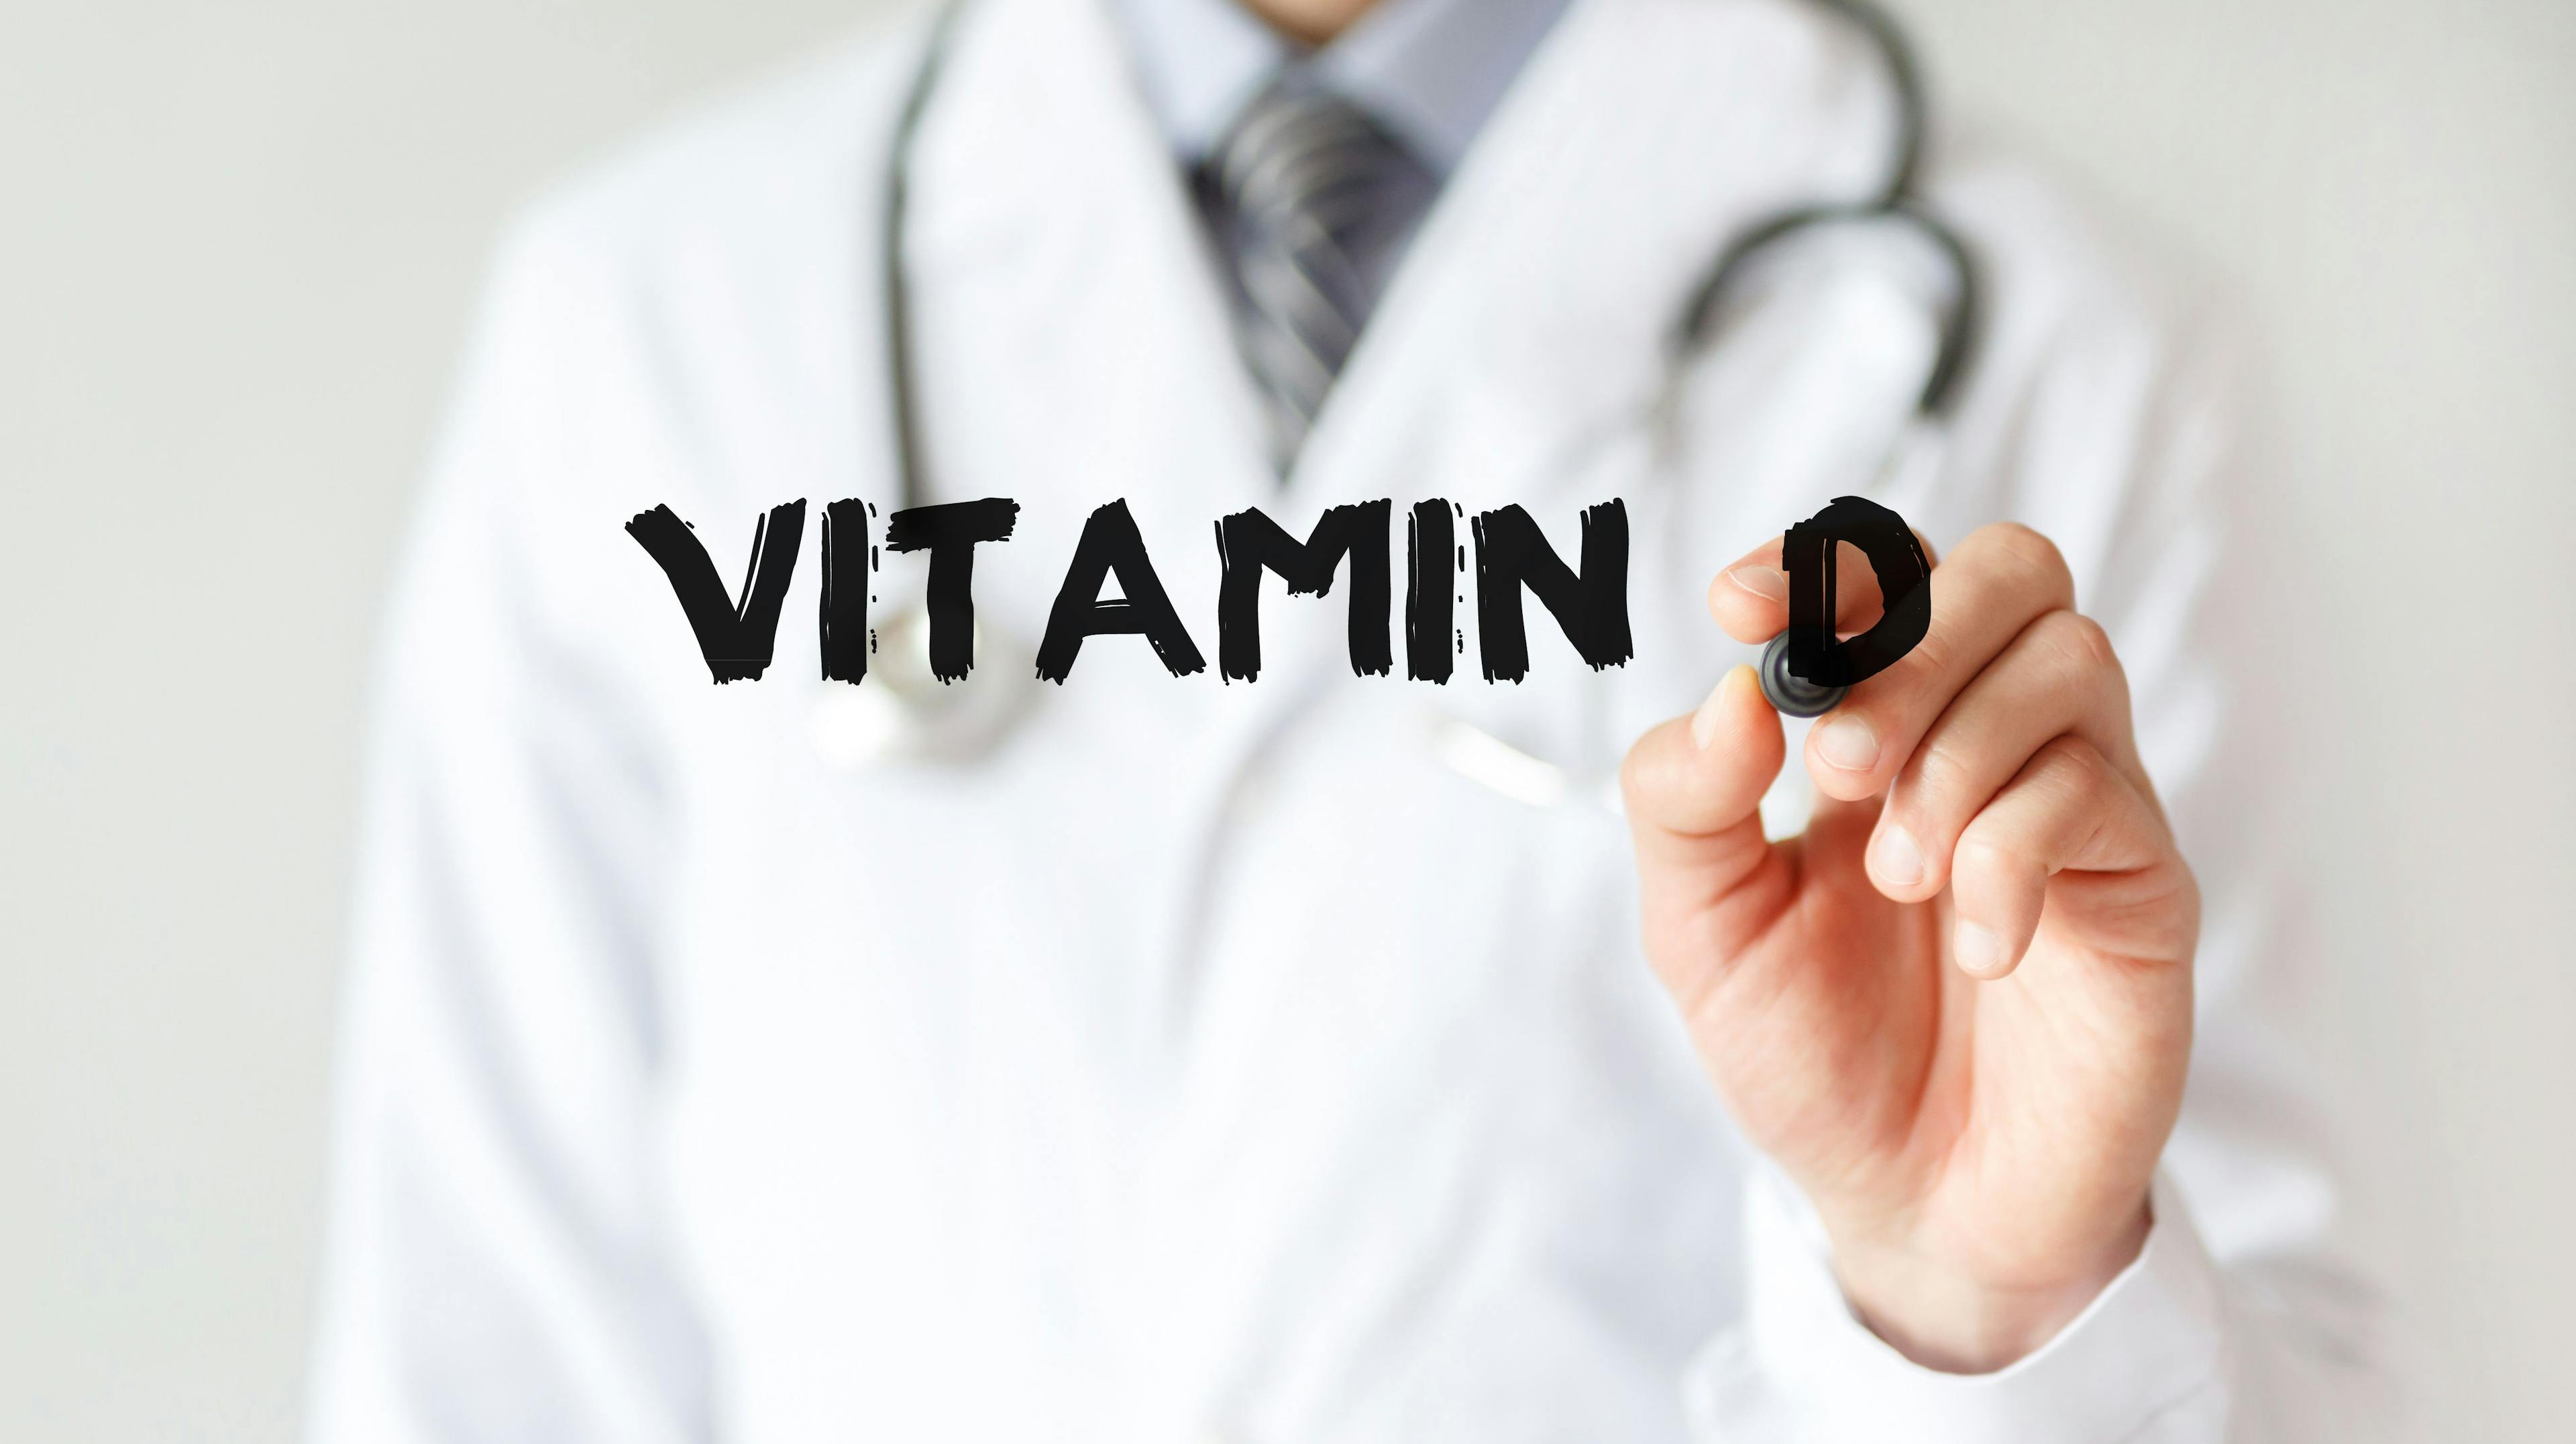 Doctor writing "vitamin D" with marker | Image Credit: MP Studio - stock.adobe.com